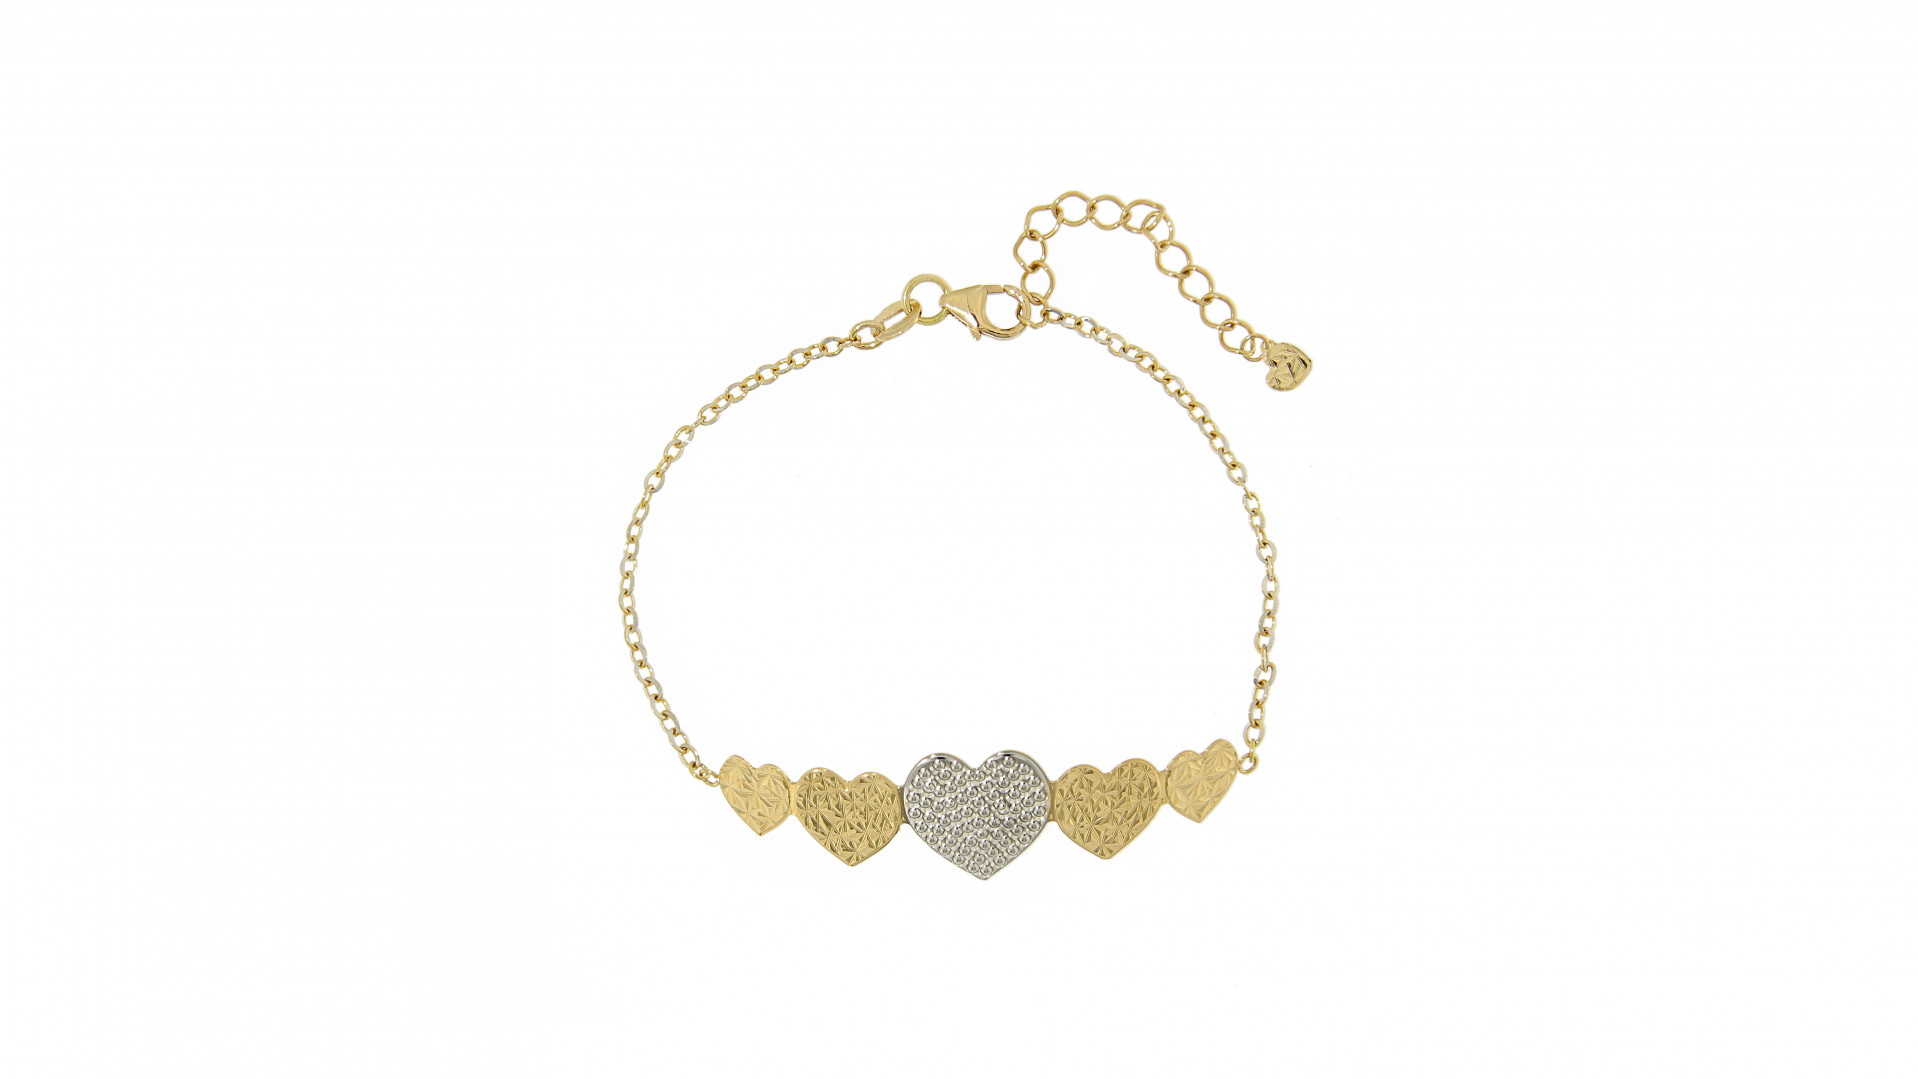 golden bracelet with hearth shaped charms